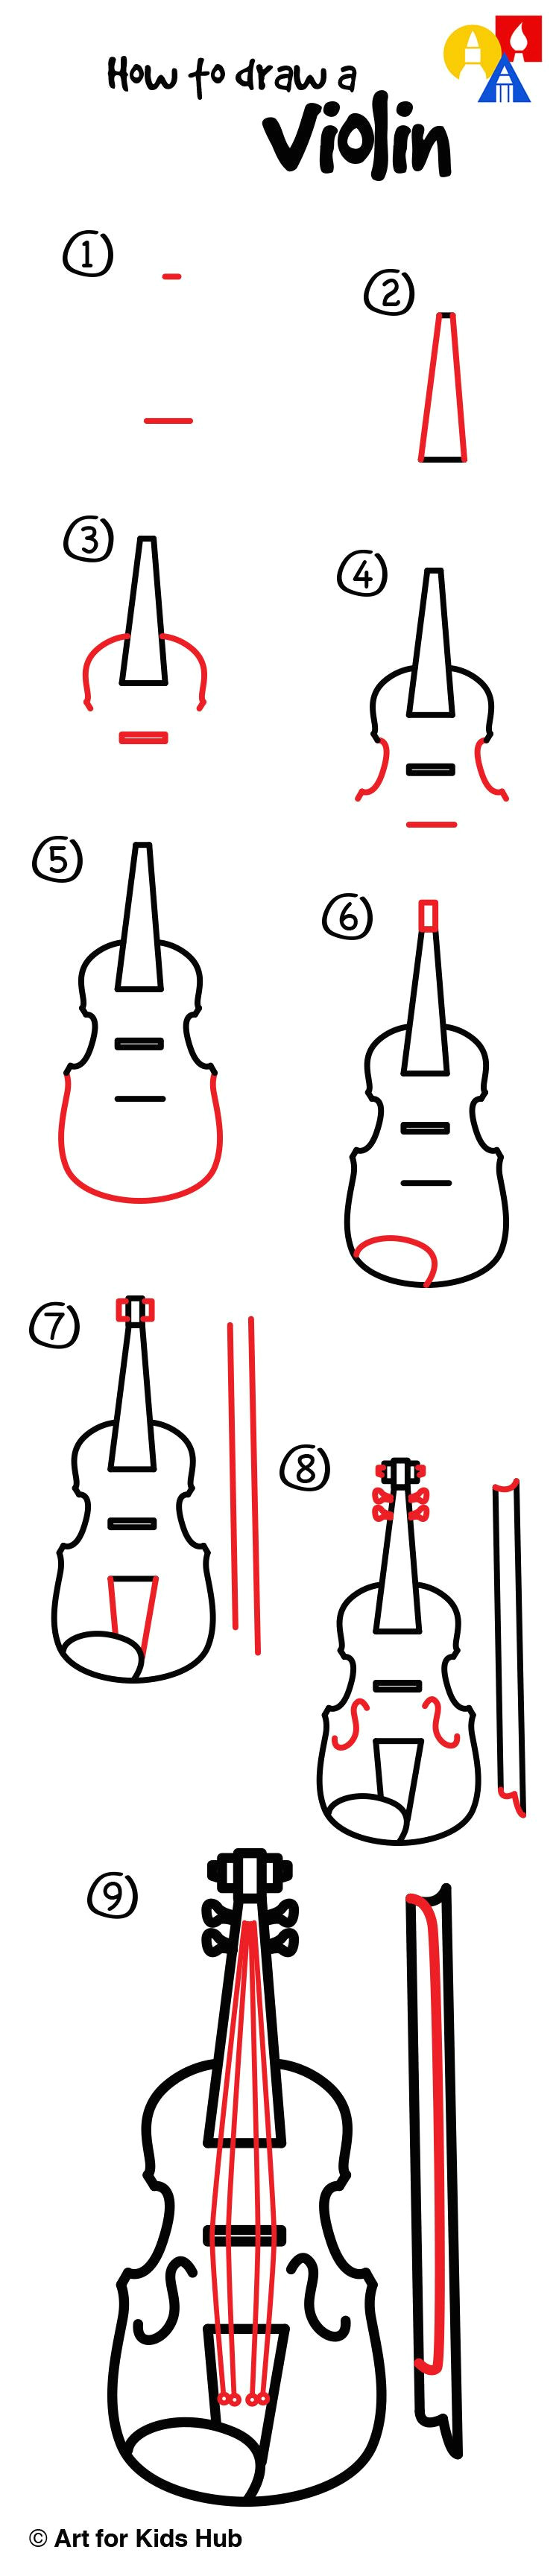 Easy Drawings Violin How to Draw A Violin Art for Kids Hub Interactive orchestra